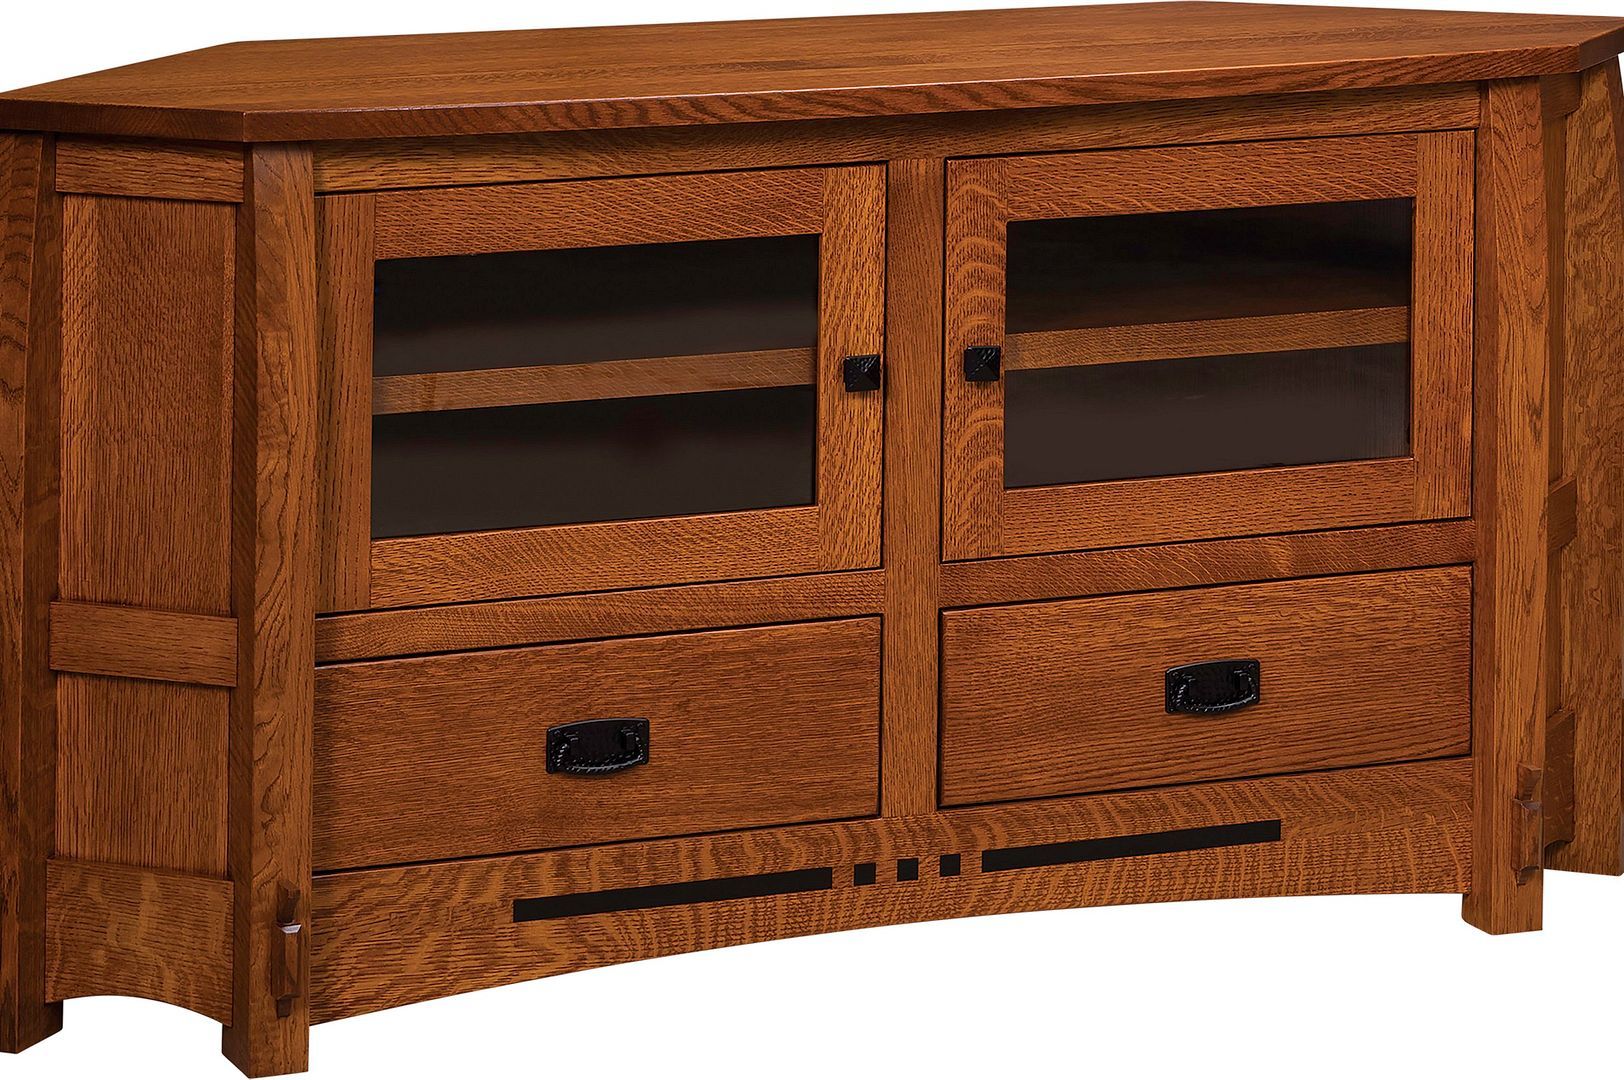 Amish Mission Colebrook Solid Wood Corner Tv Stand Console Pertaining To White Wood Corner Tv Stands (View 9 of 15)